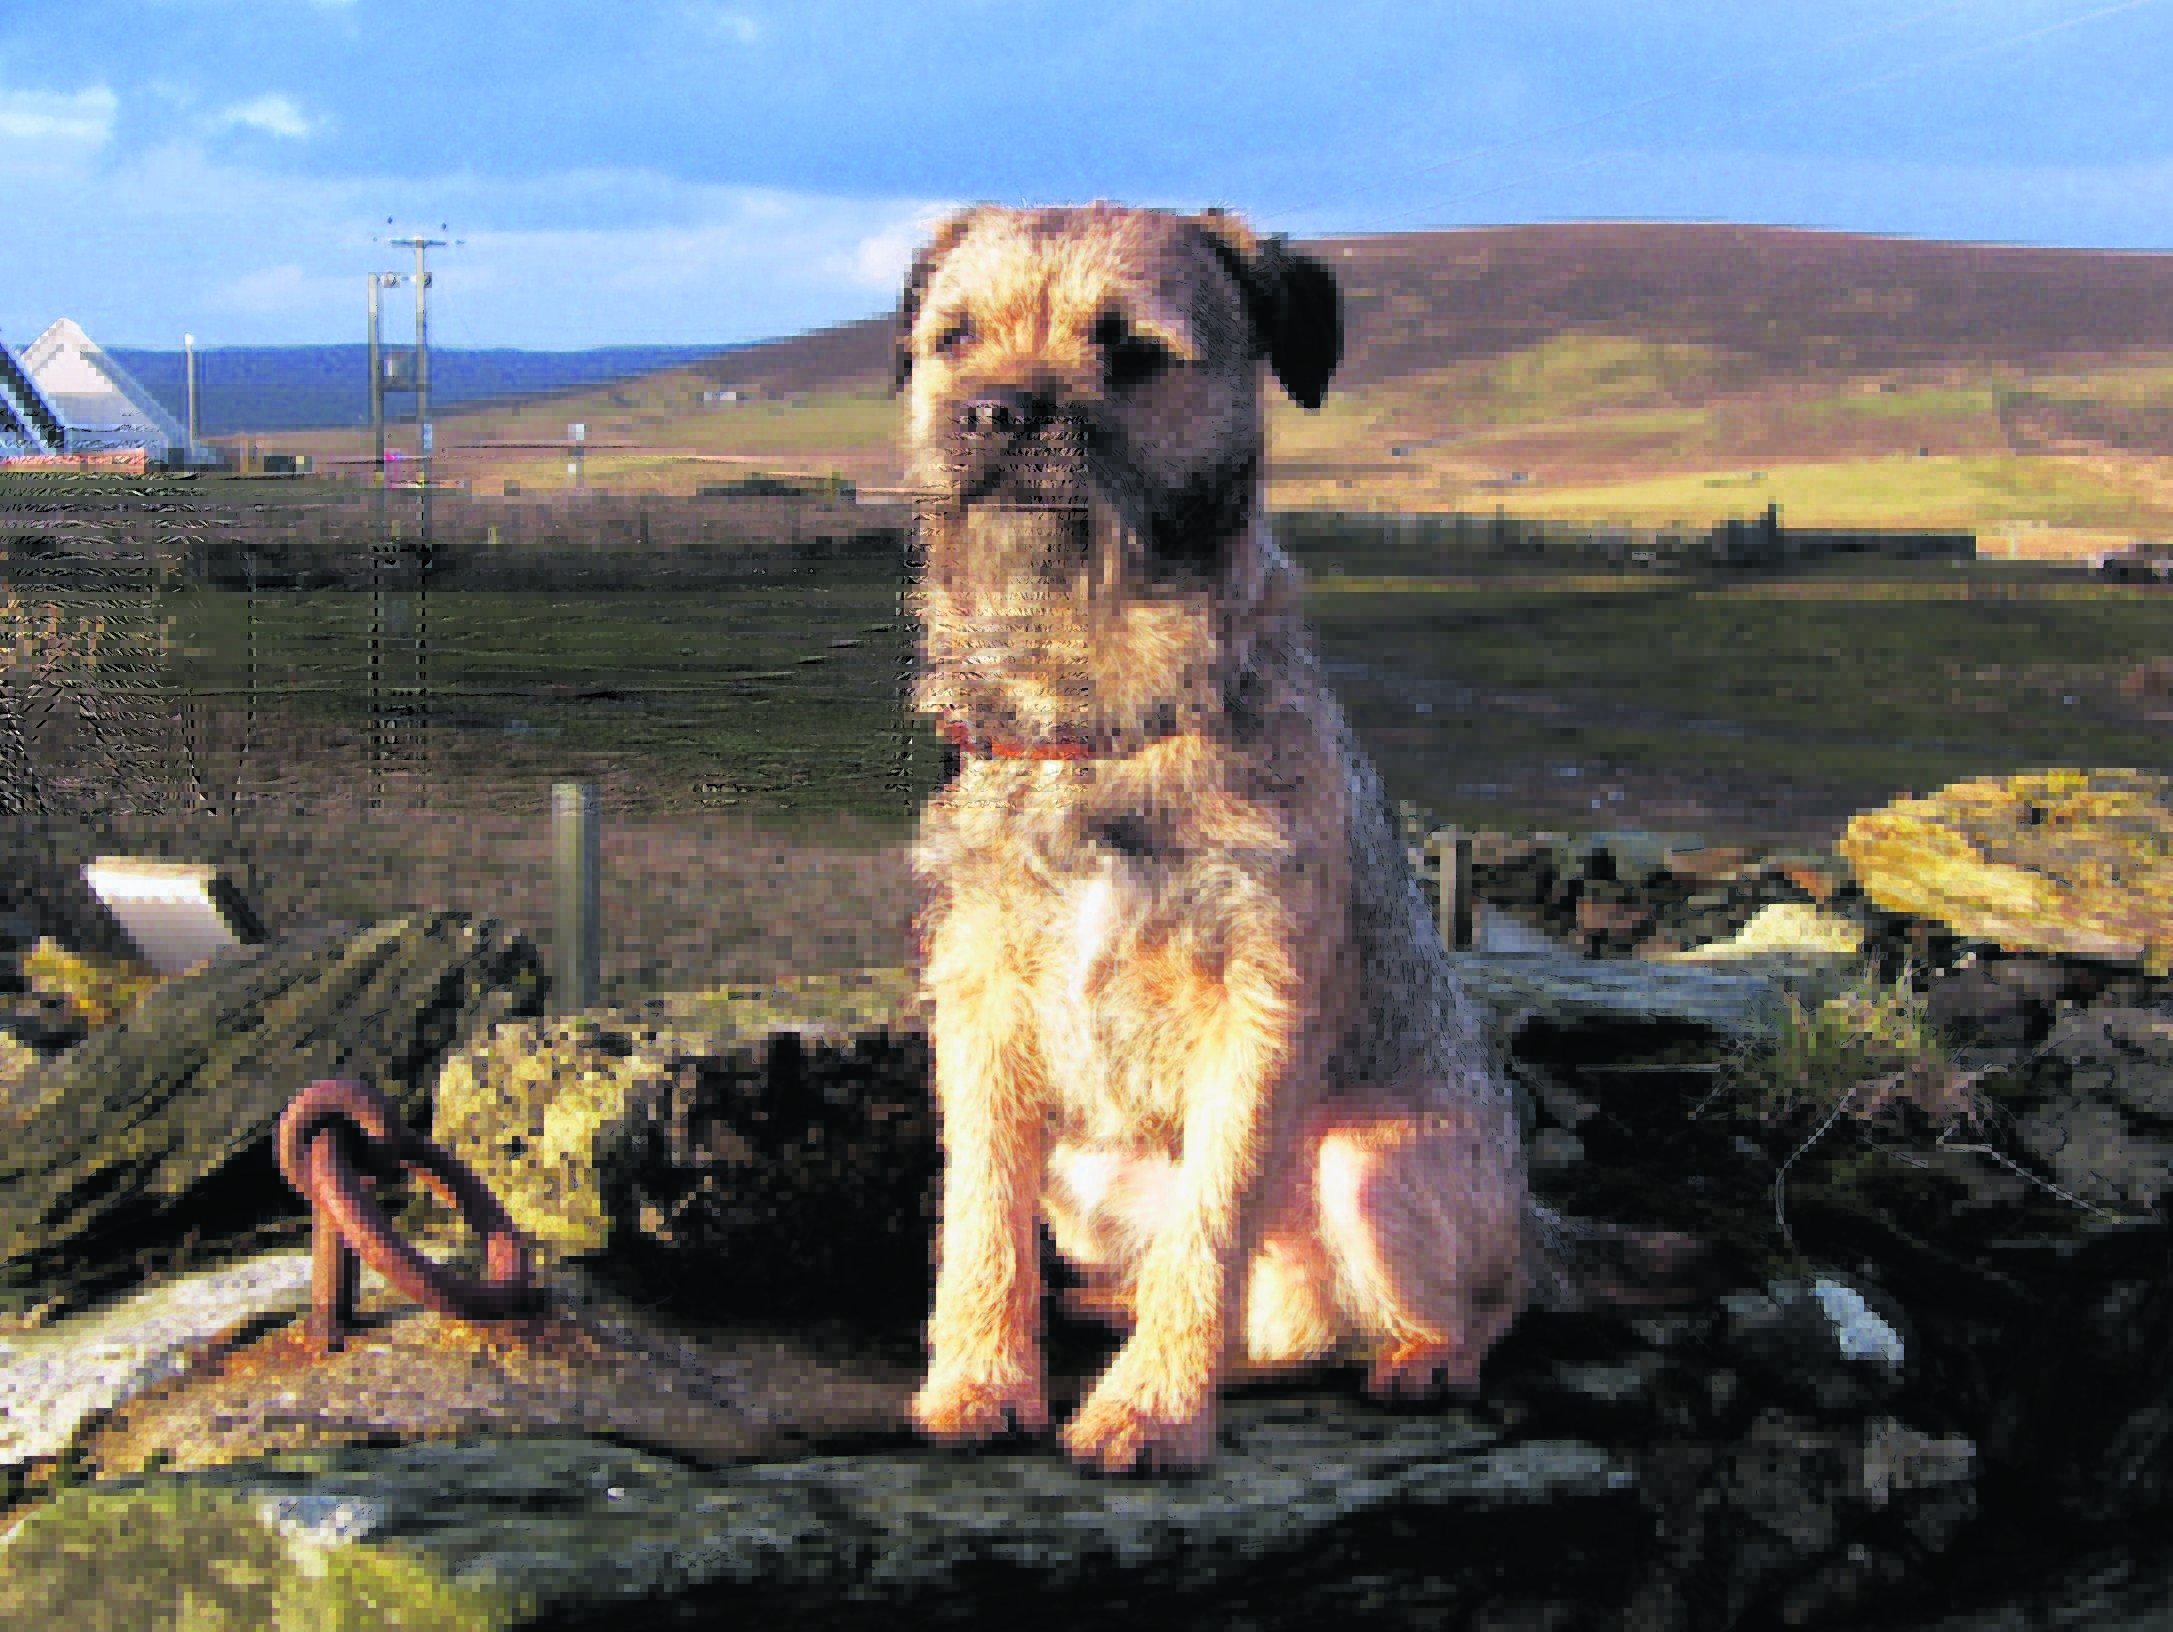 This is Kosbie, the three year old border terrier. He was born in Shetland and lives with the Cerasale family in Norwick, the northernmost part of Unst.